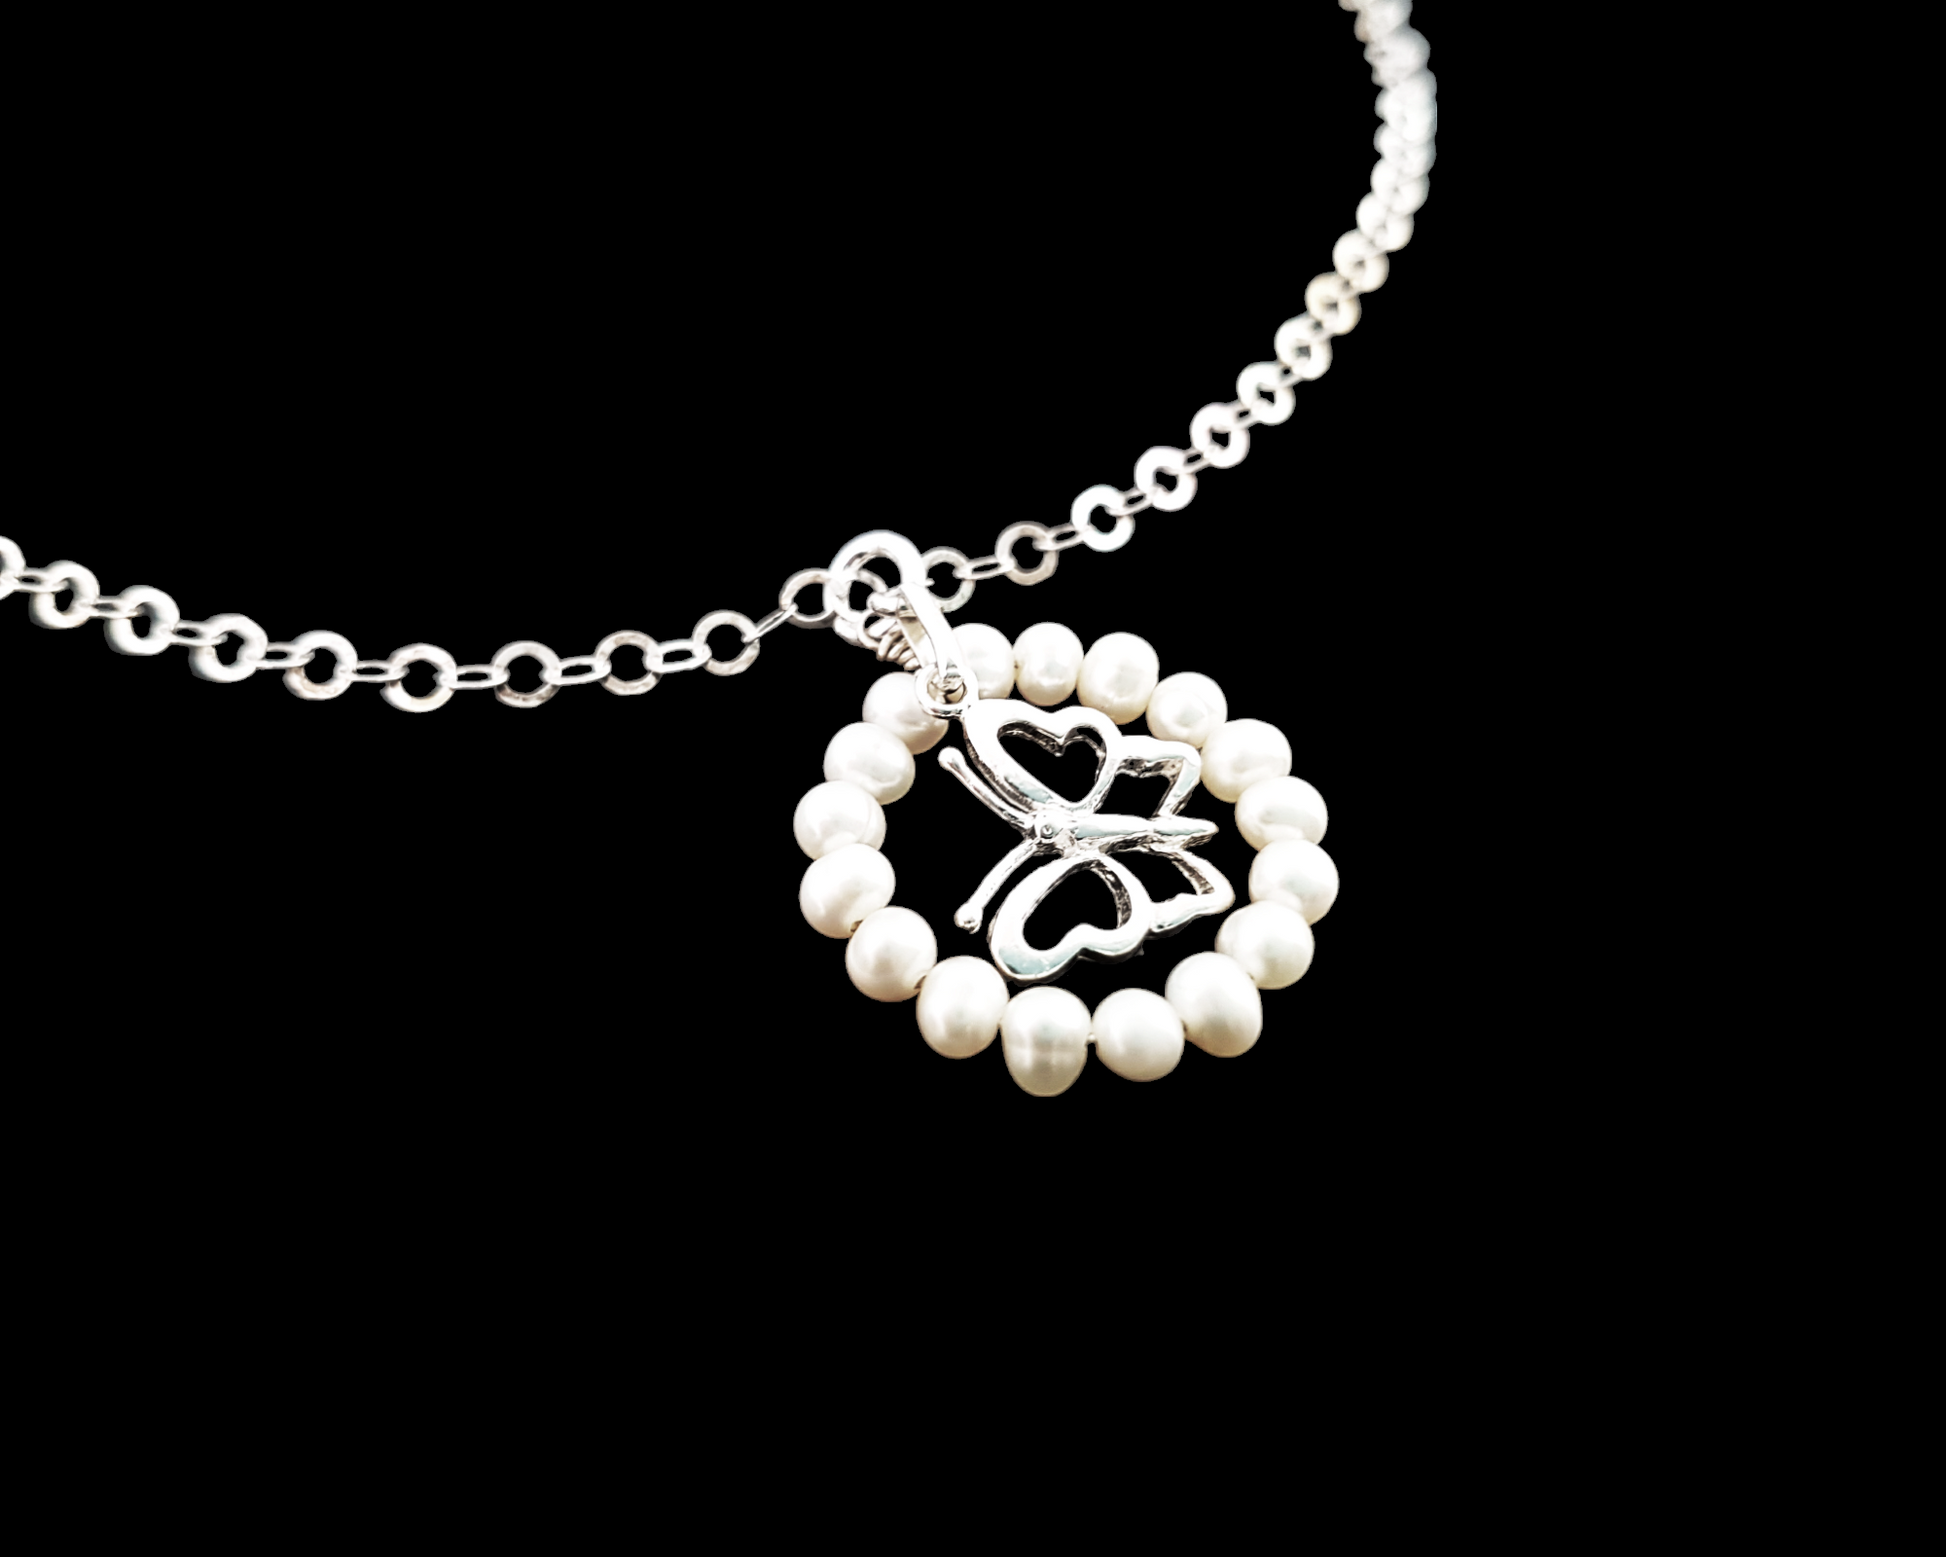 Butterfly Pearl Eternity Necklace-Sterling Silver Butterfly inside a White Freshwater Cultured Pearl Eternity Ring Pendant on Sparkly chain.